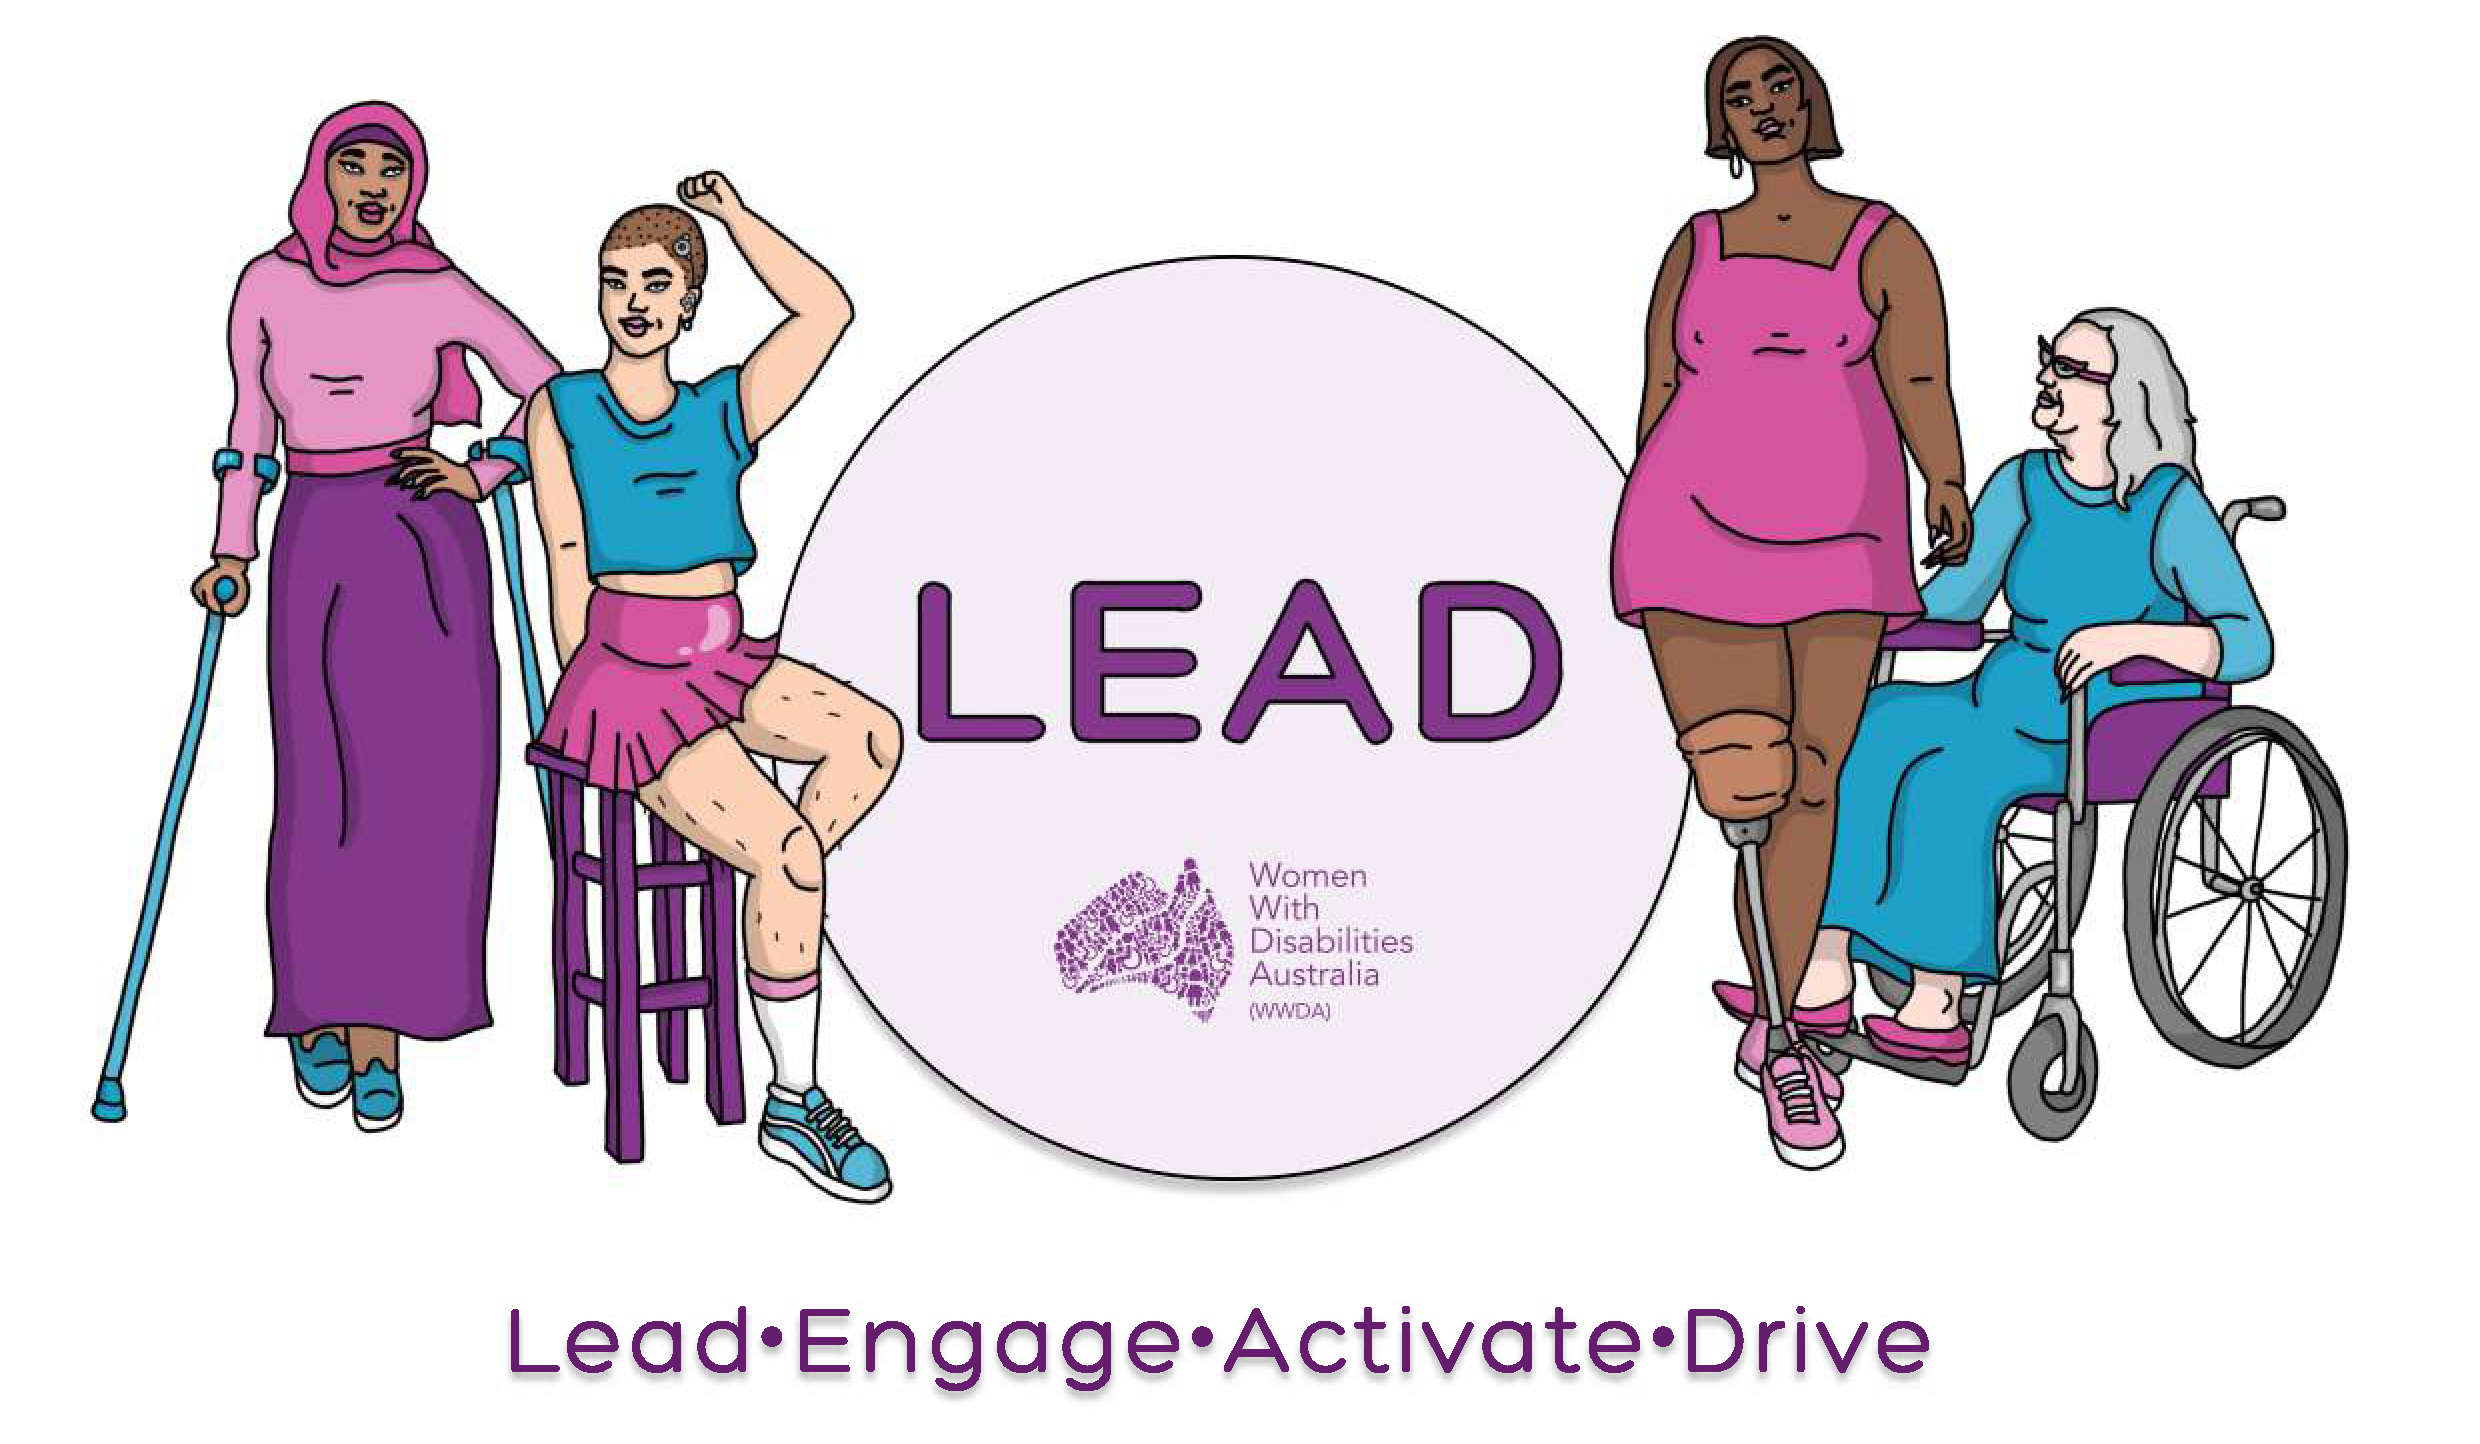 White background with an illustration of four women representing diversity and disability. In the middle in a purple circle reads LEAD, Lead, Engage, Activate and drive.